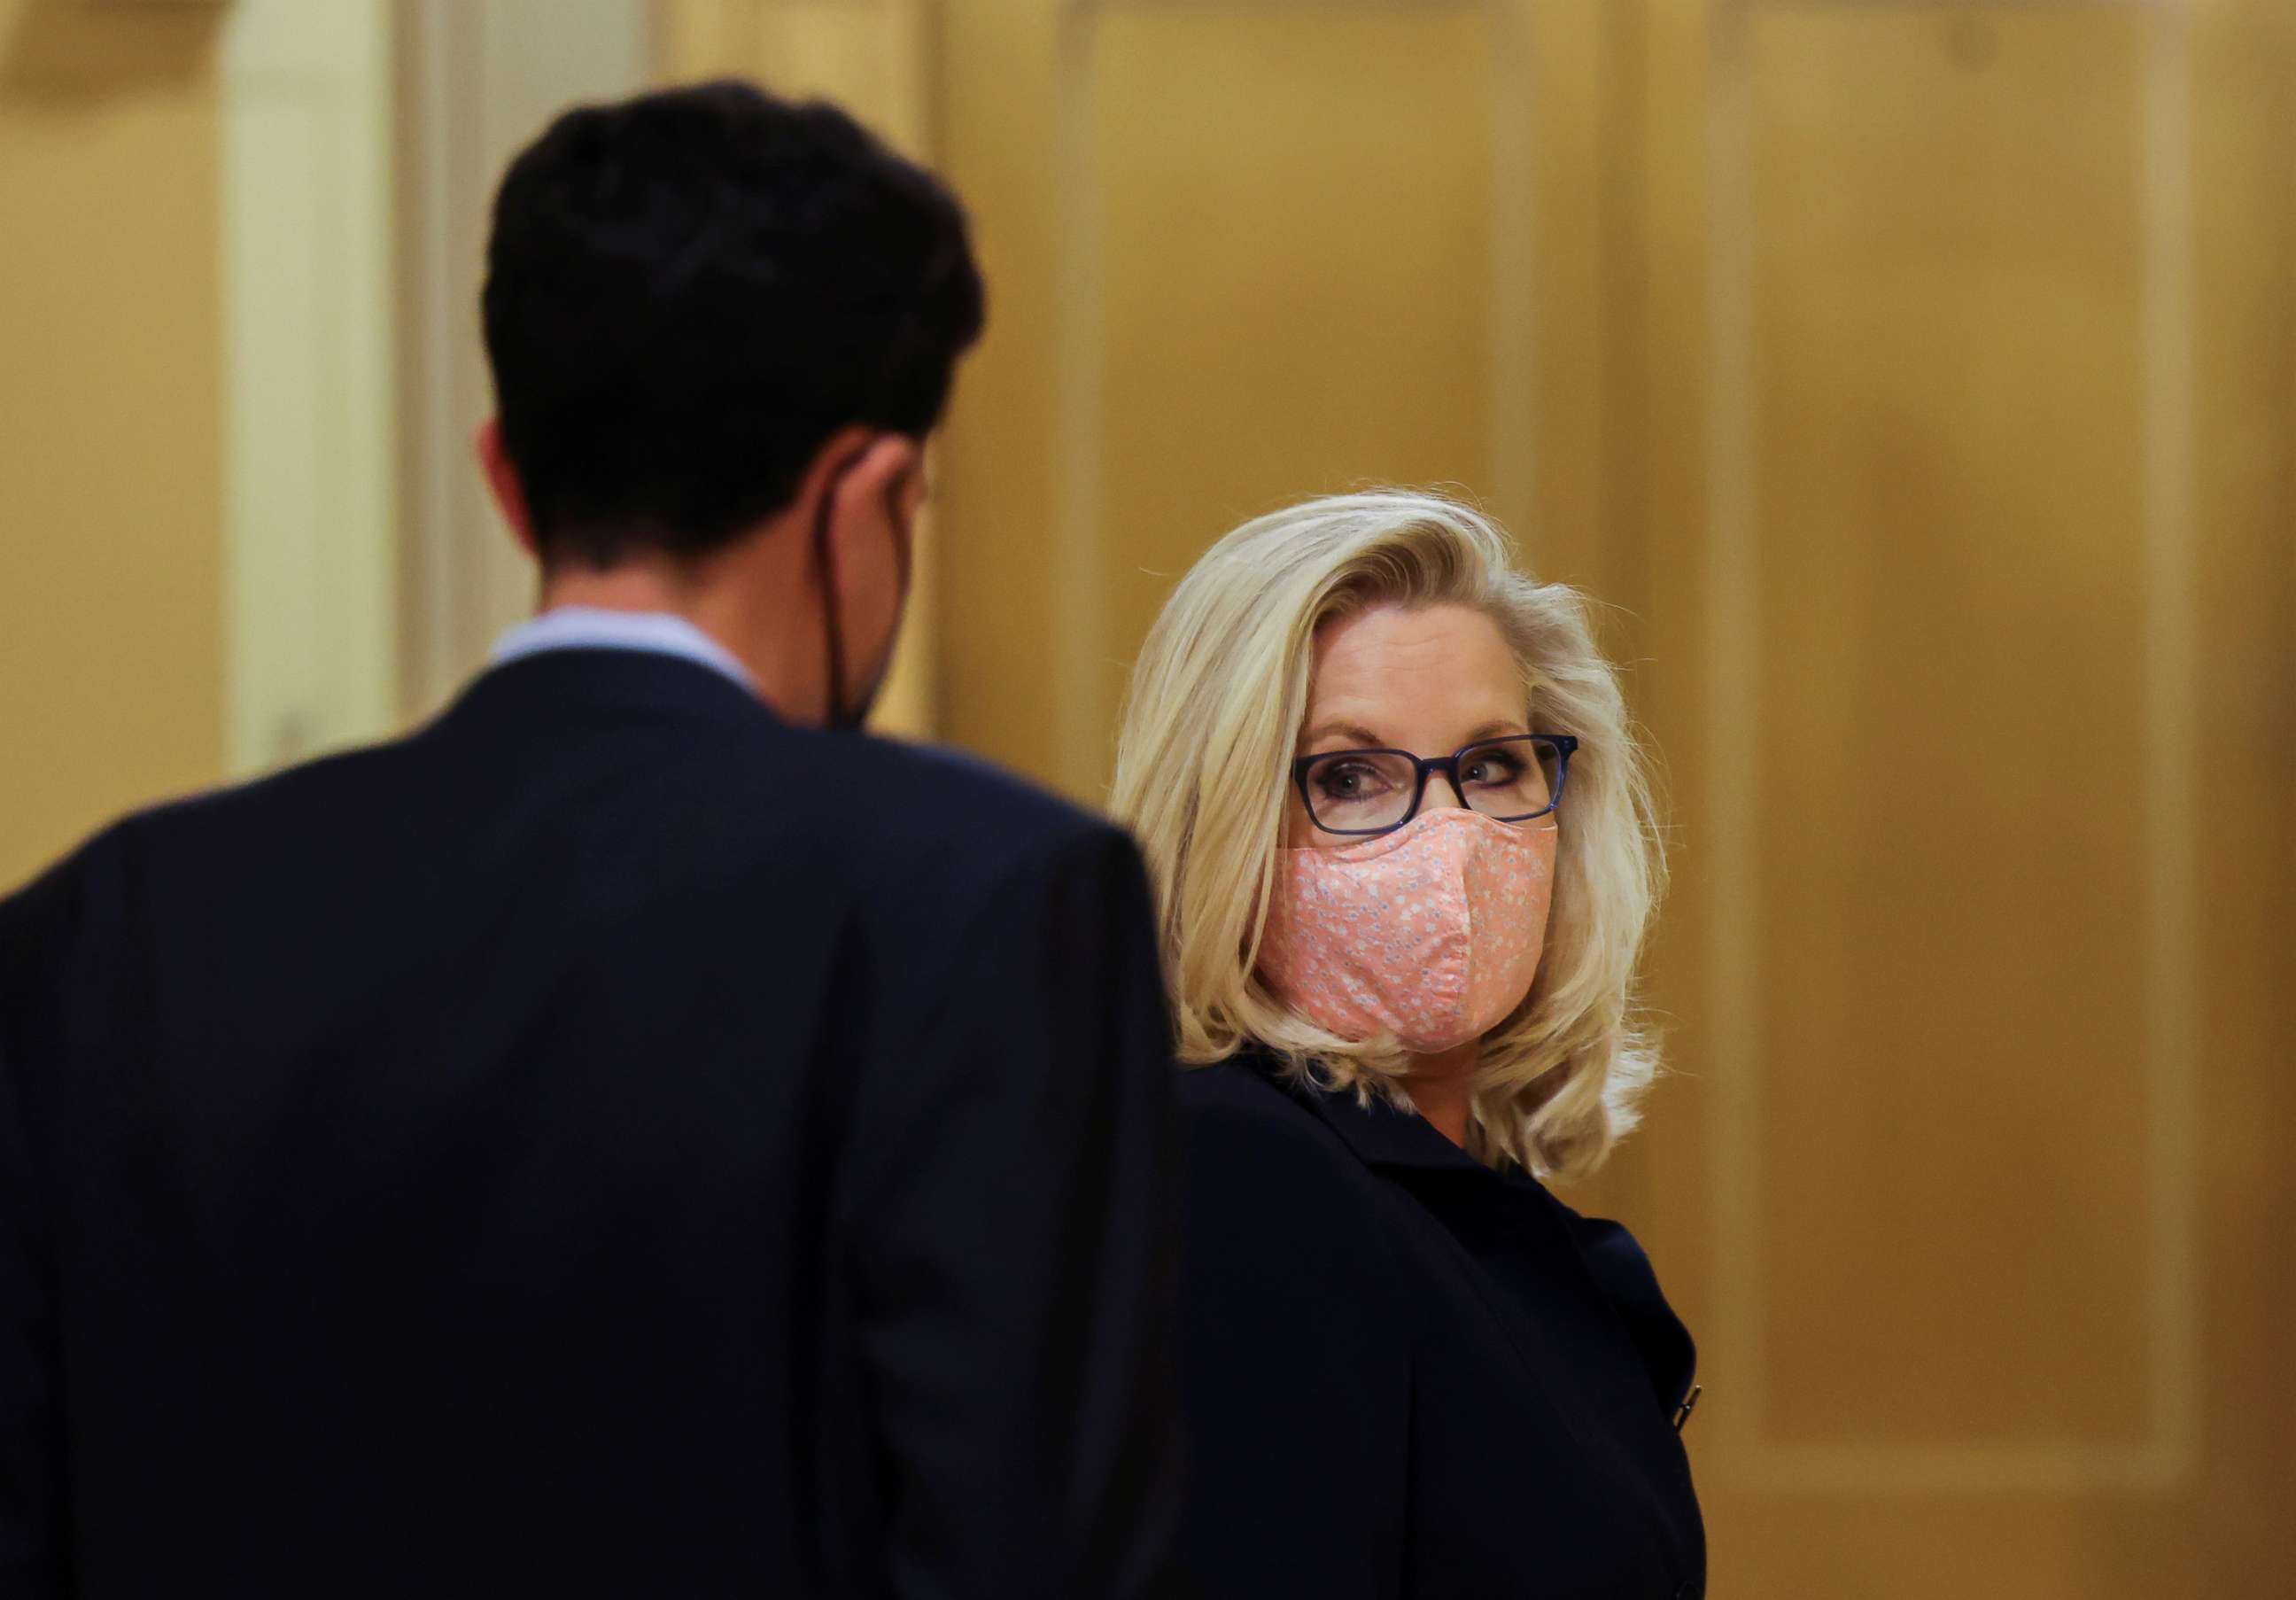 PHOTO: Rep. Liz Cheney arrives for a House vote at the U.S. Capitol in Washington, May 11, 2021.